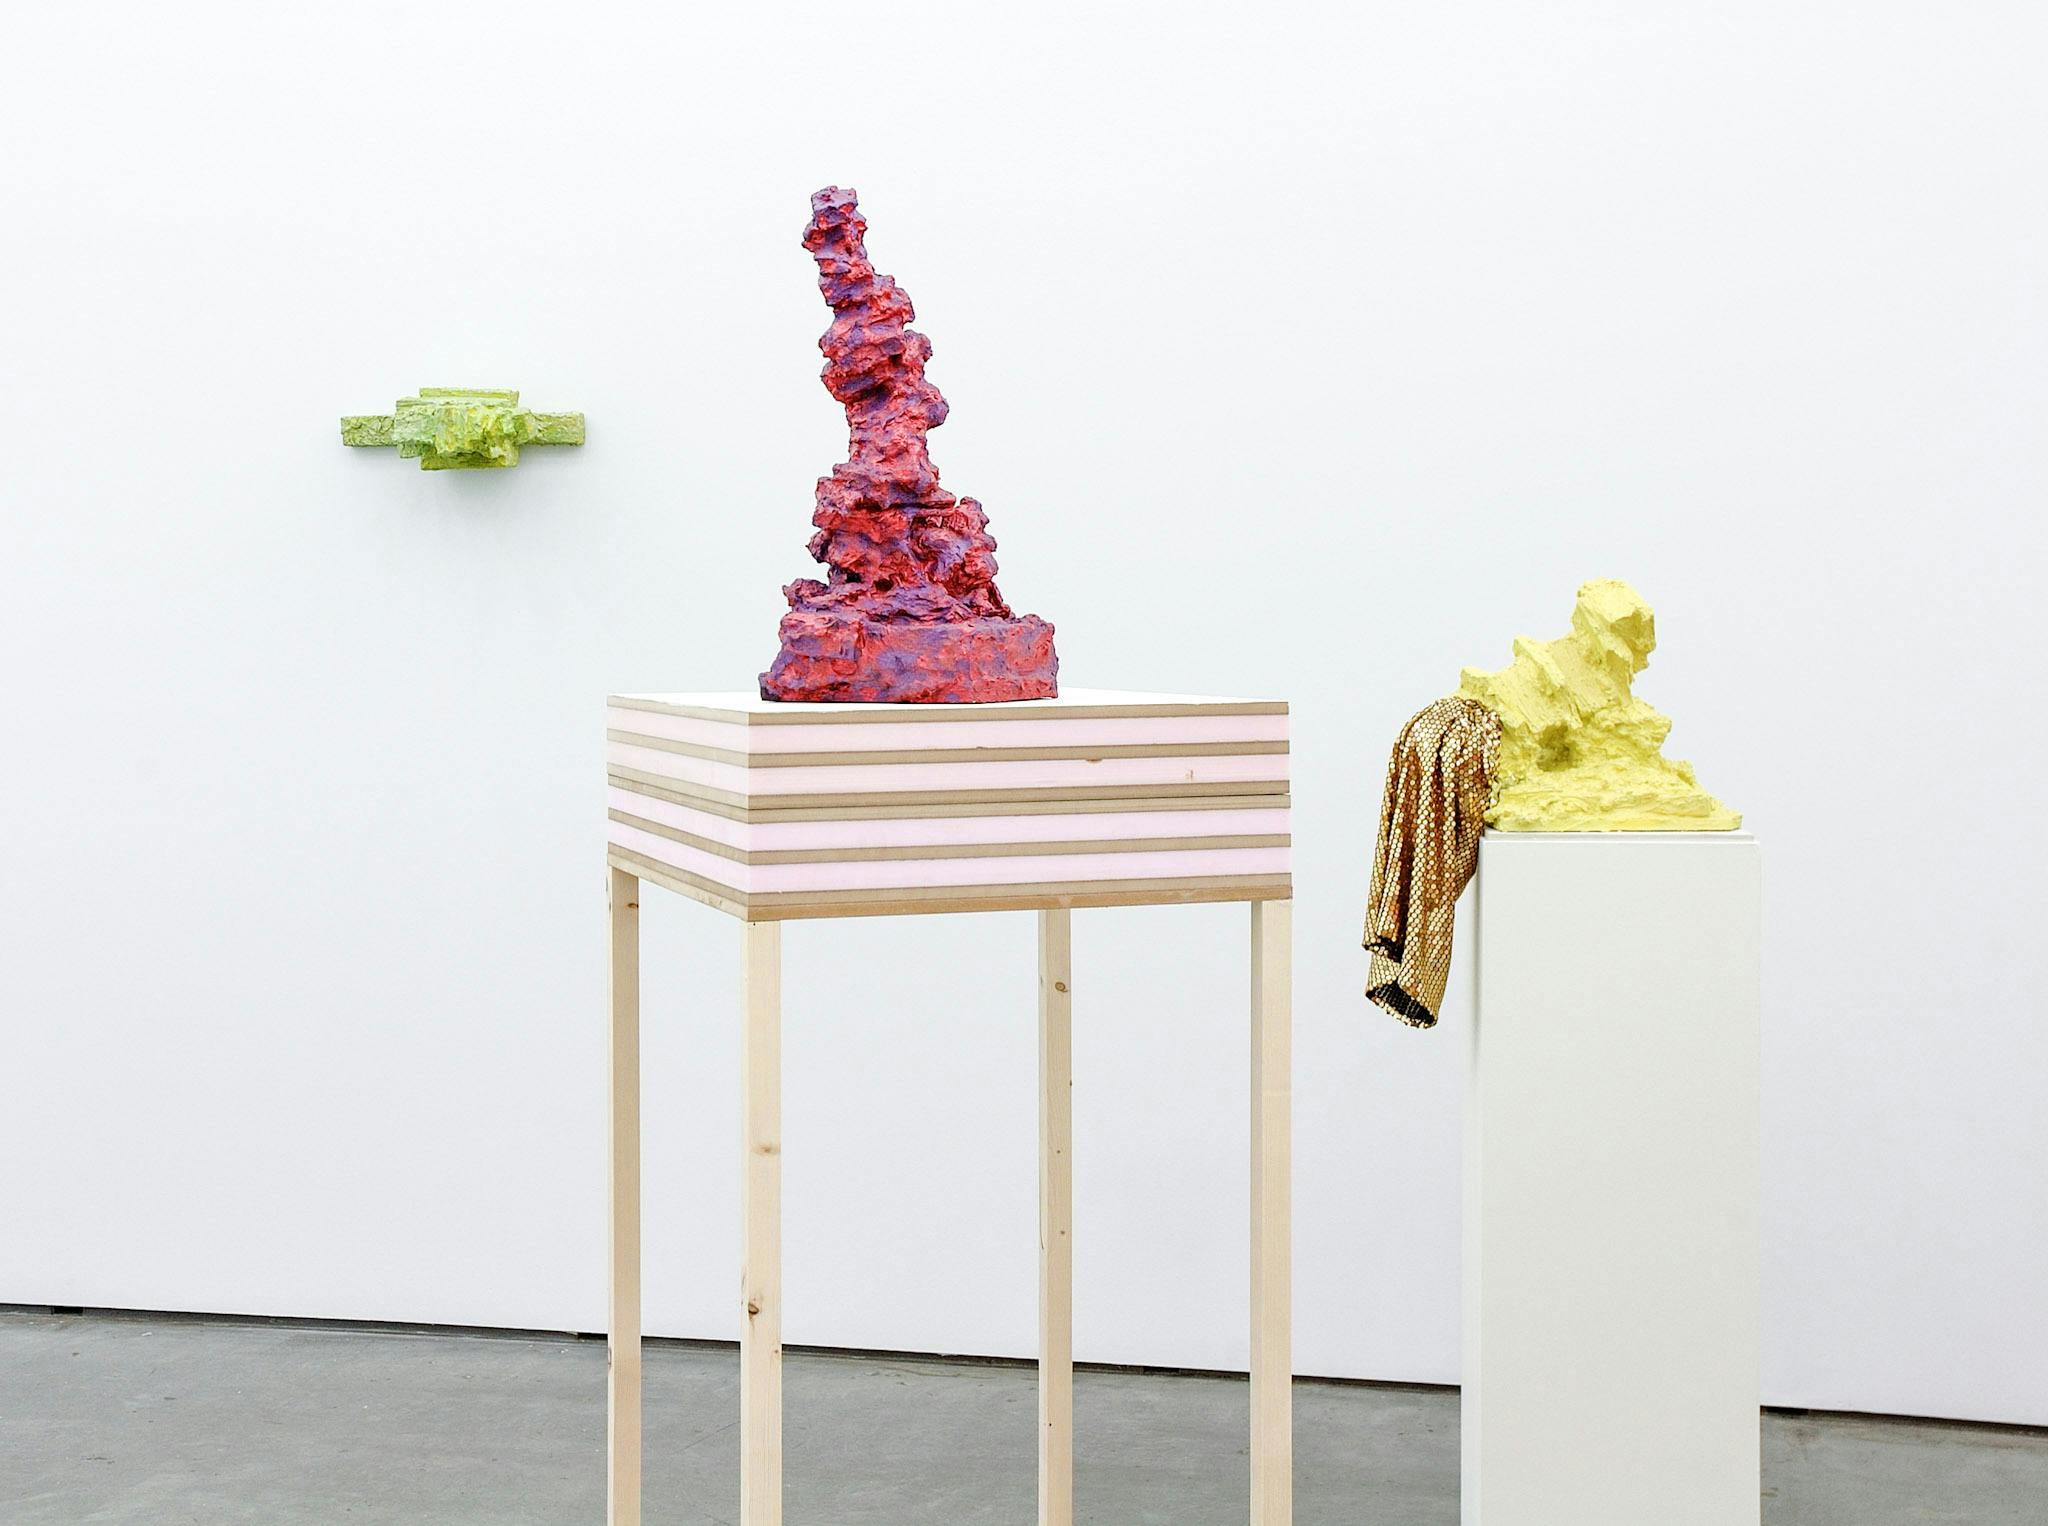 Three artworks in a gallery. One is narrow and green, mounted on the wall. One is red and purple, resting on wood and foam. The third is yellow with gold sequined fabric on top, resting on a plinth.